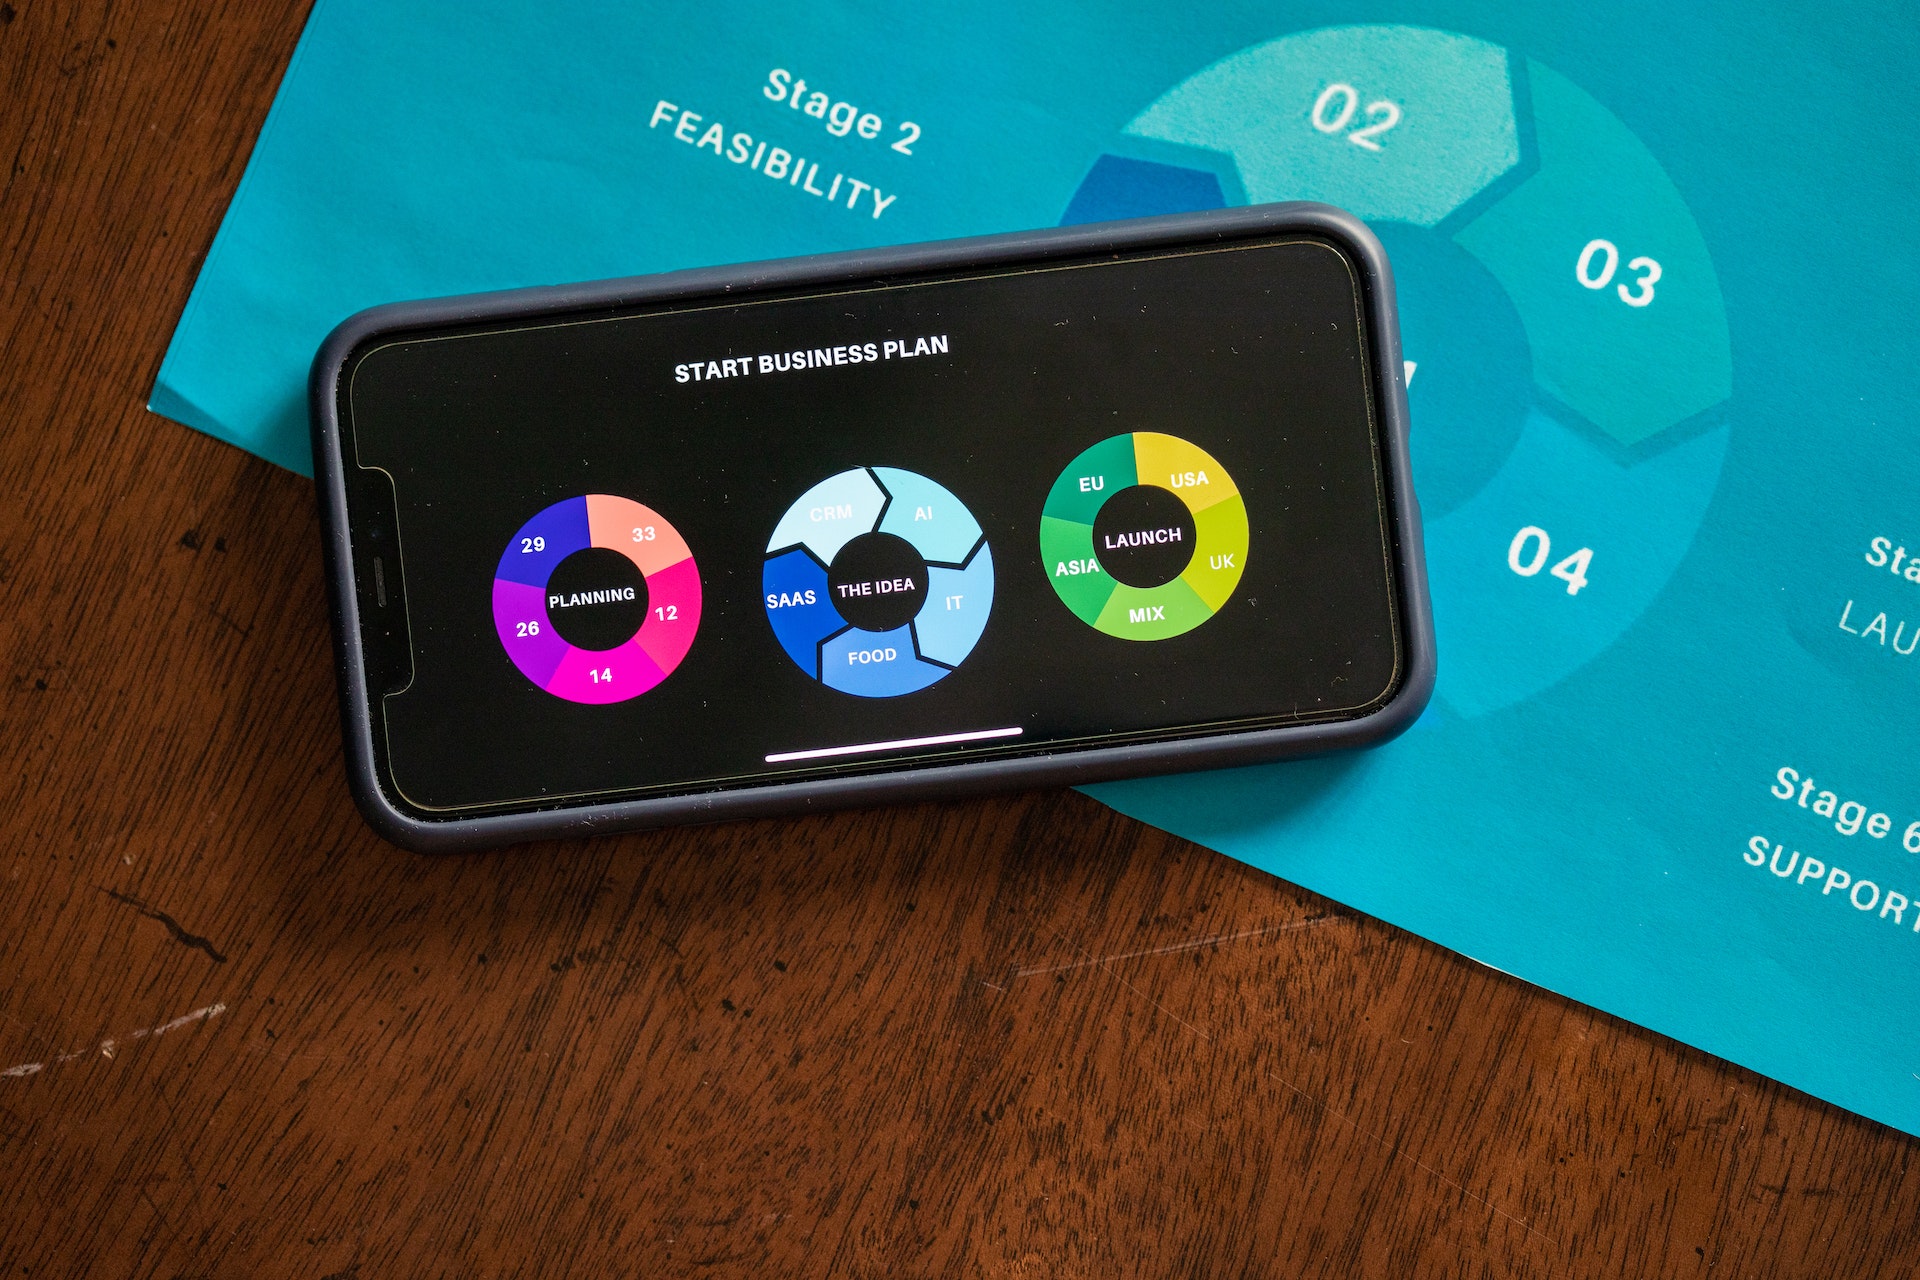 A smartphone on a wooden table displays an image titled “Start Business Plan” and three circular. multi-colored charts, one labeled “Planning,” one labeled “The Idea,” and the last labeled “Launch.”